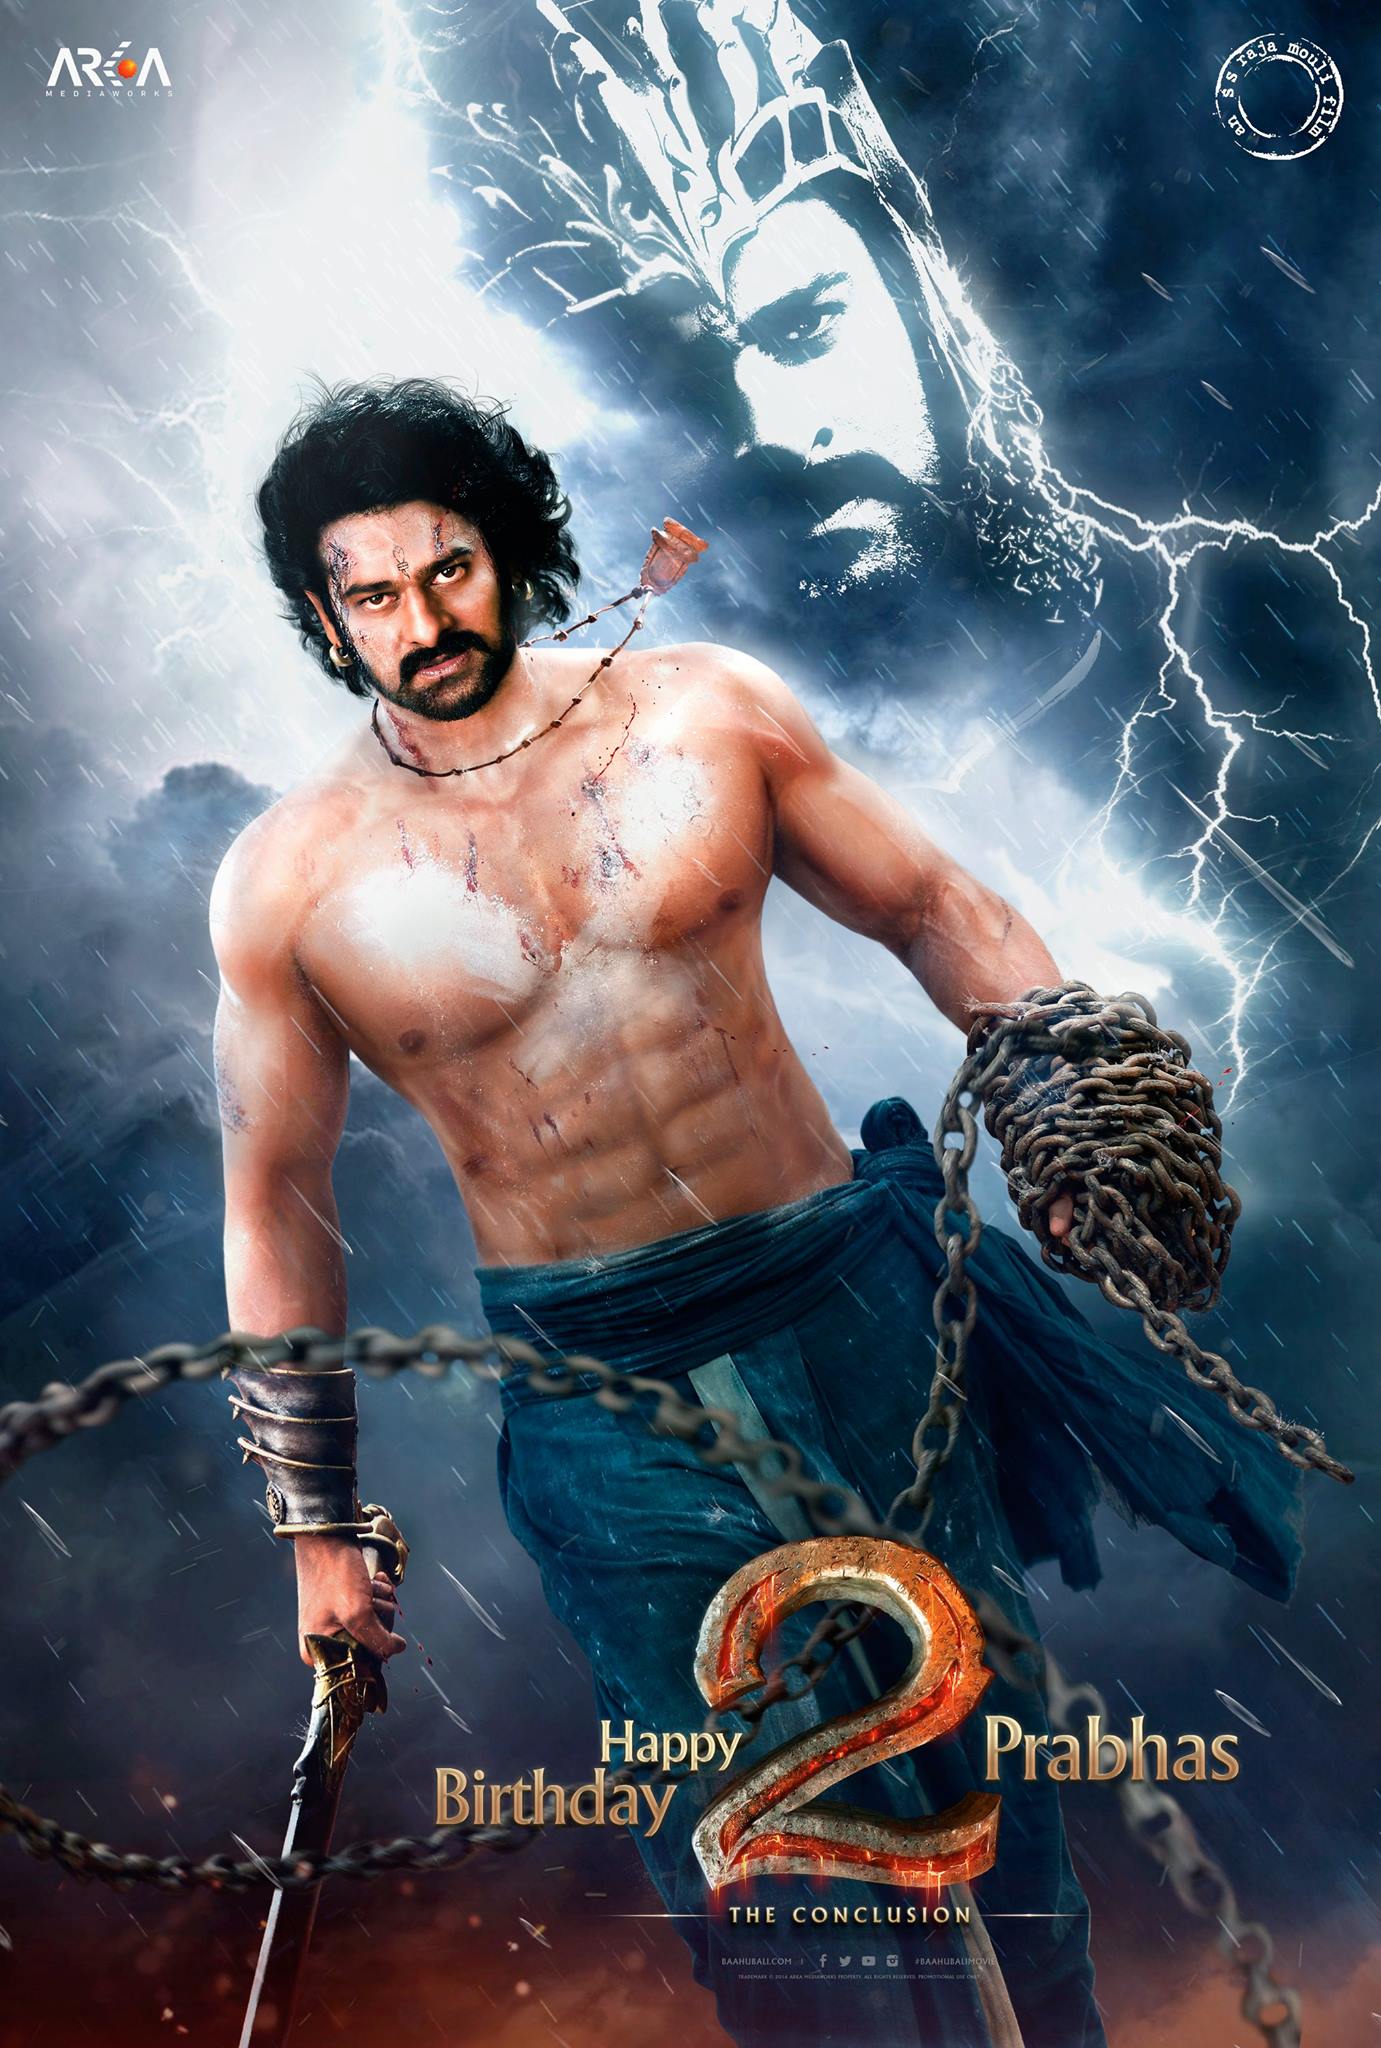 8 Probable reasons why 'Adipurush' actor Prabhas's movies aren't successful  after the Baahubali franchise | The Times of India